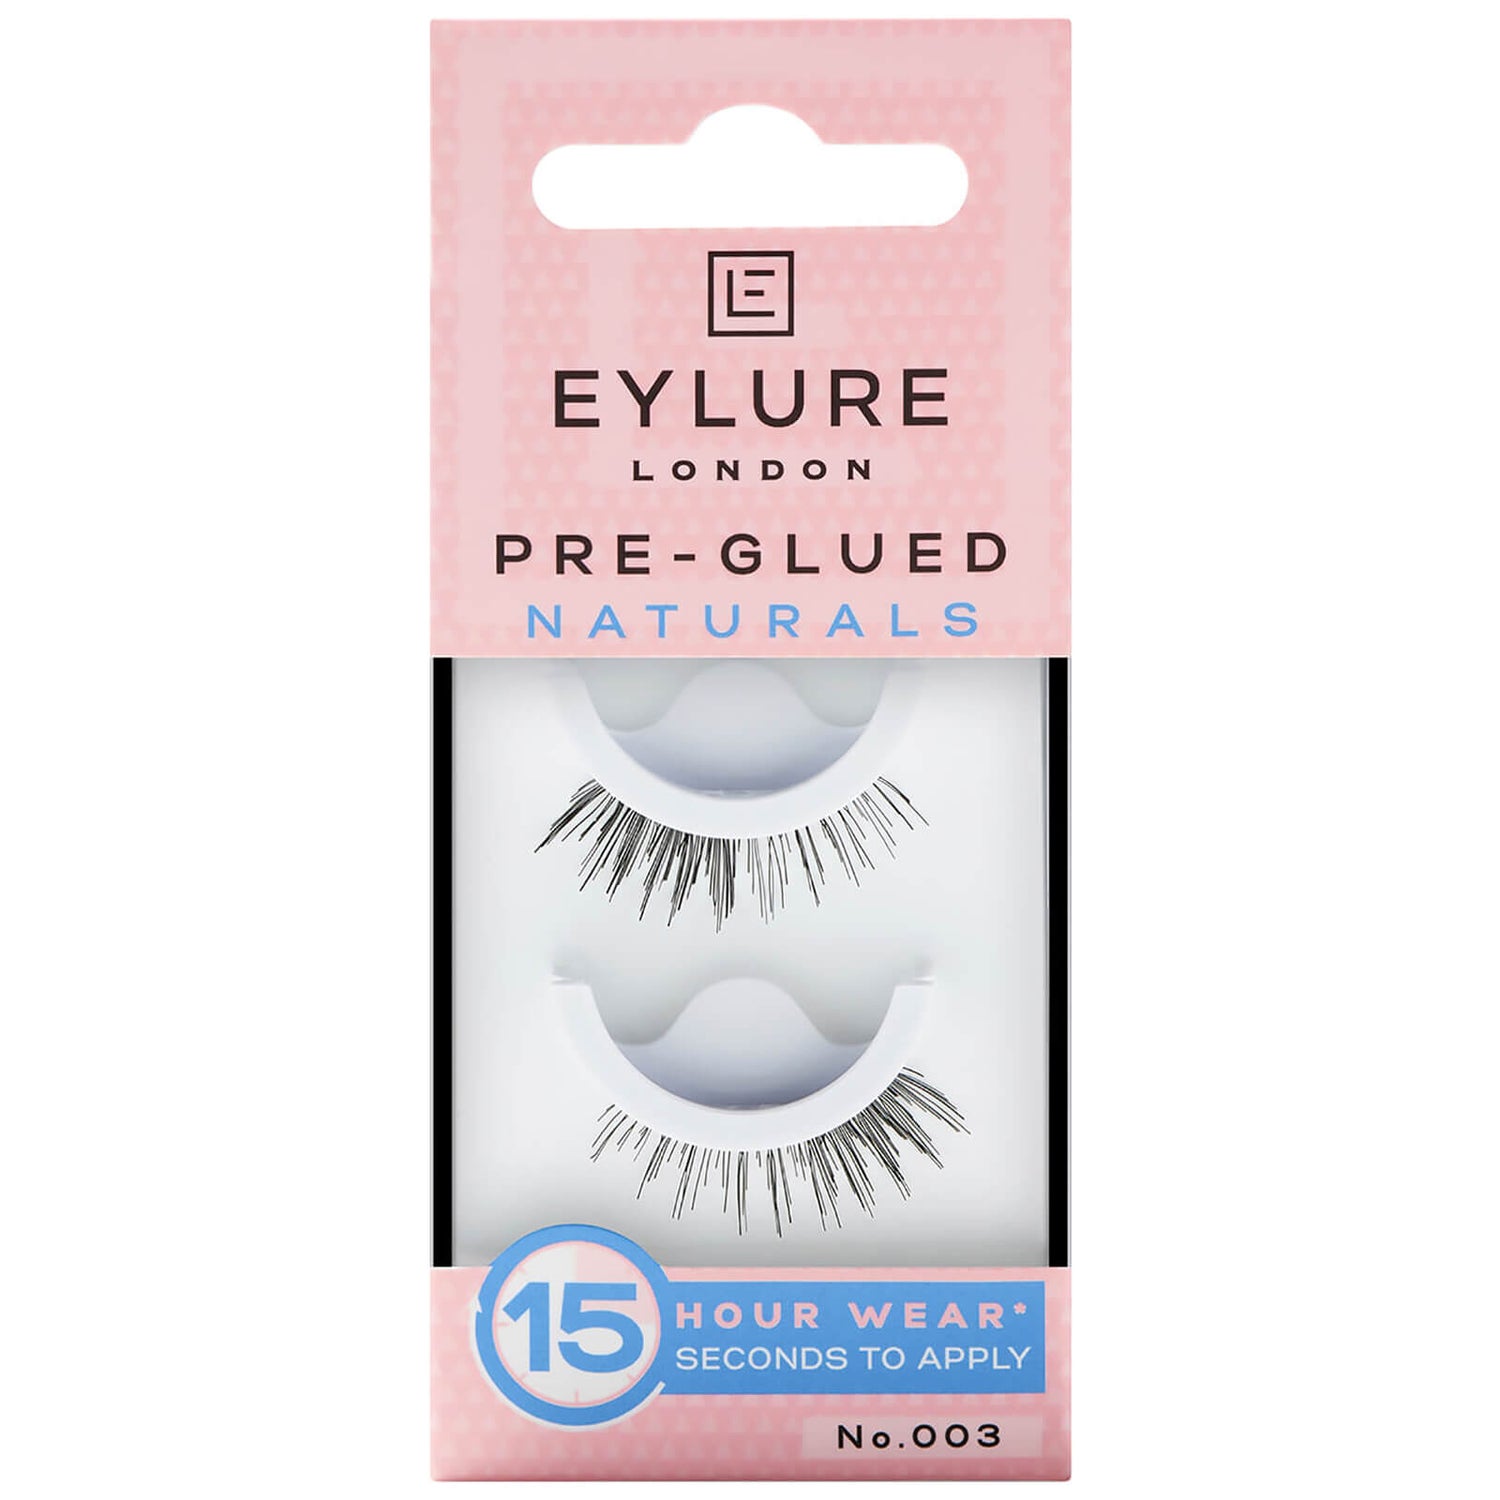 Eylure Pre-Glued Accents 003 Lashes